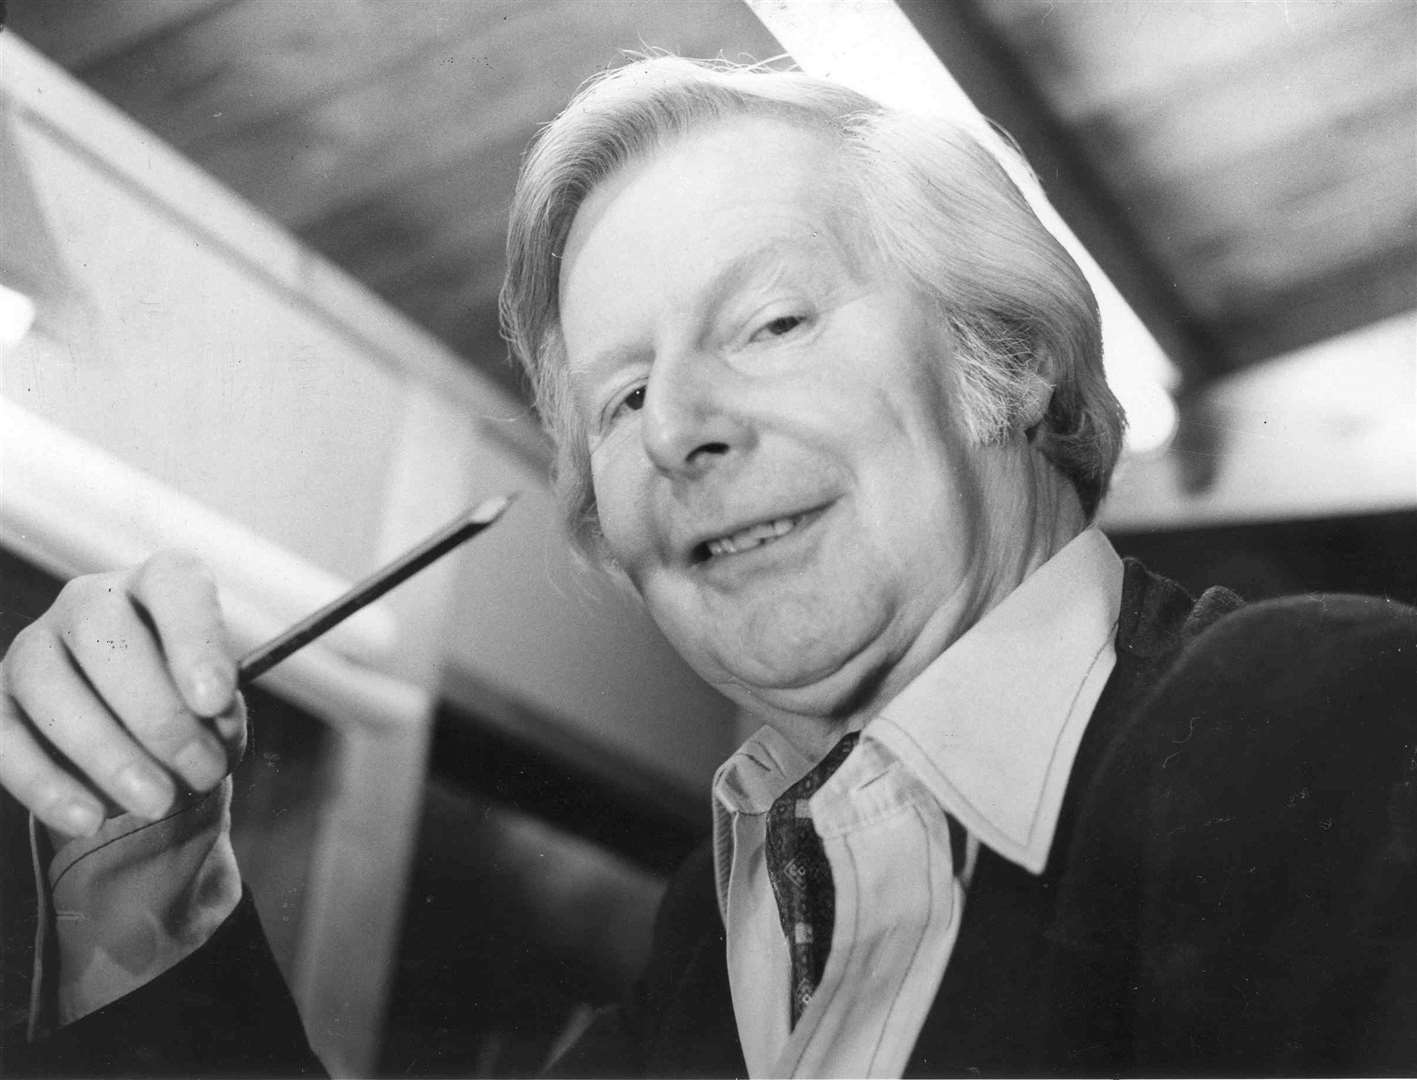 Maidstone-born TV artist Tony Hart was a children's TV regular with his popular shows